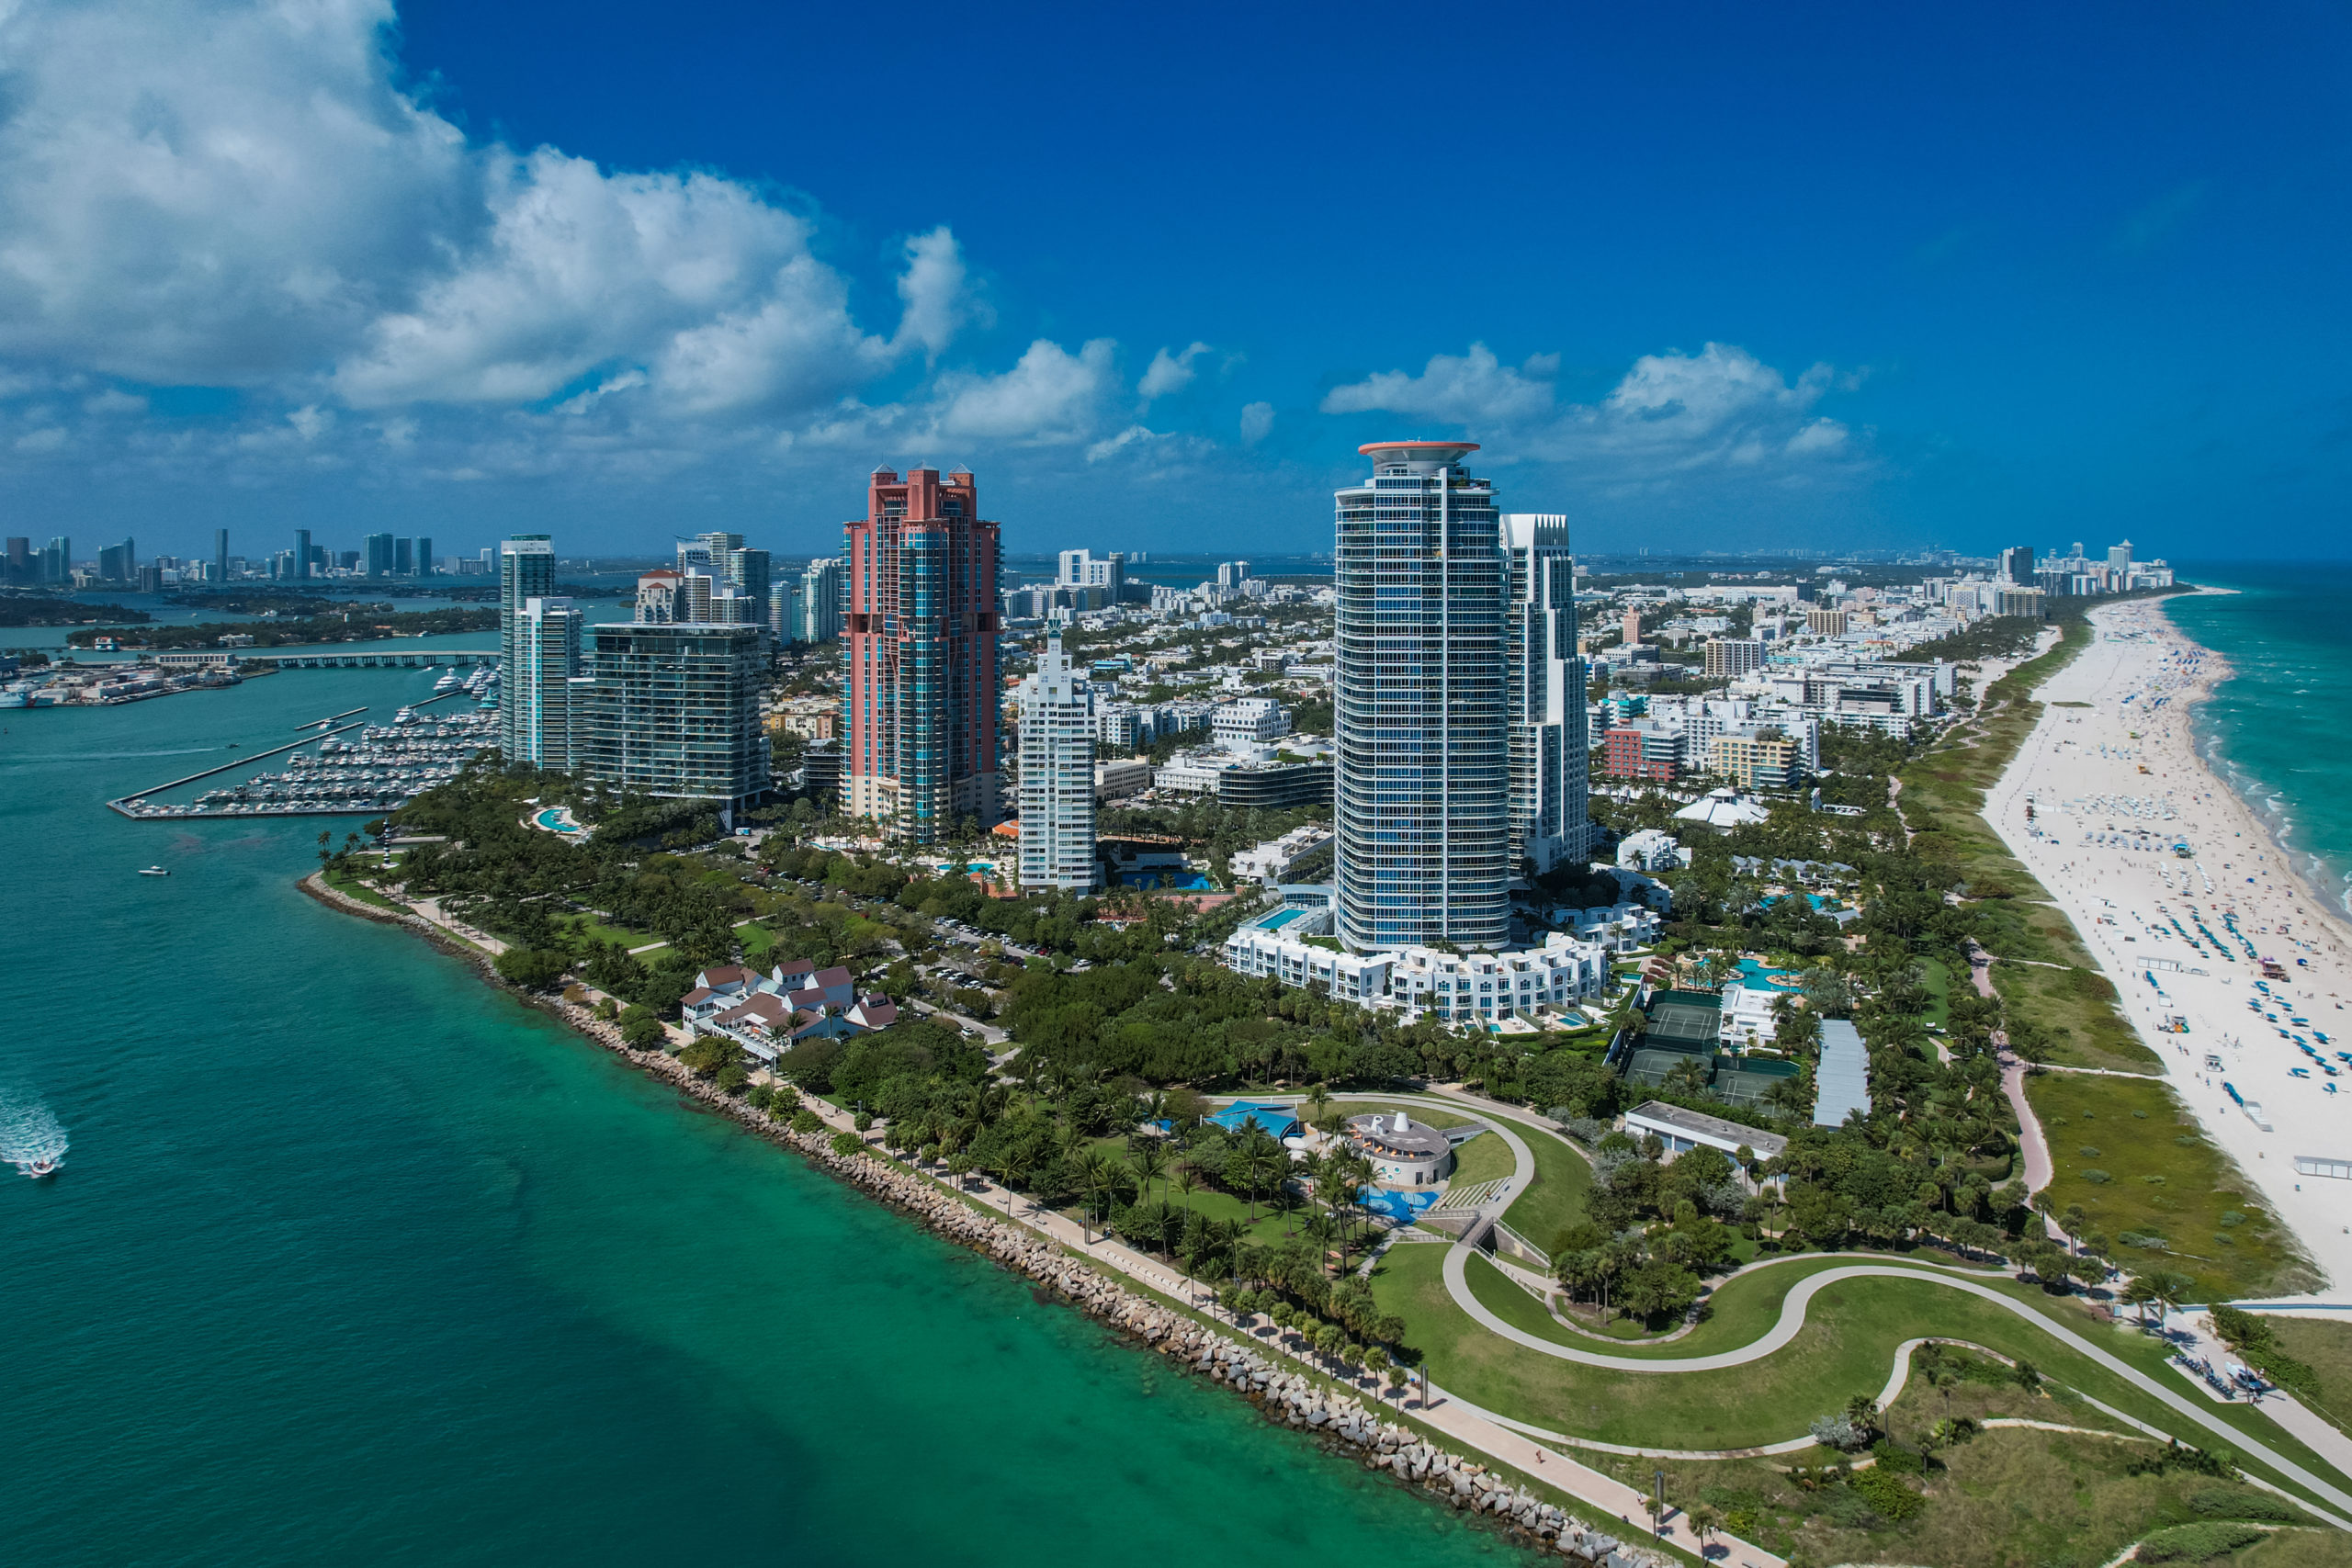 Continuum on South Beach Units for Sale | The Best Continuum Residence for Sale in December 2019